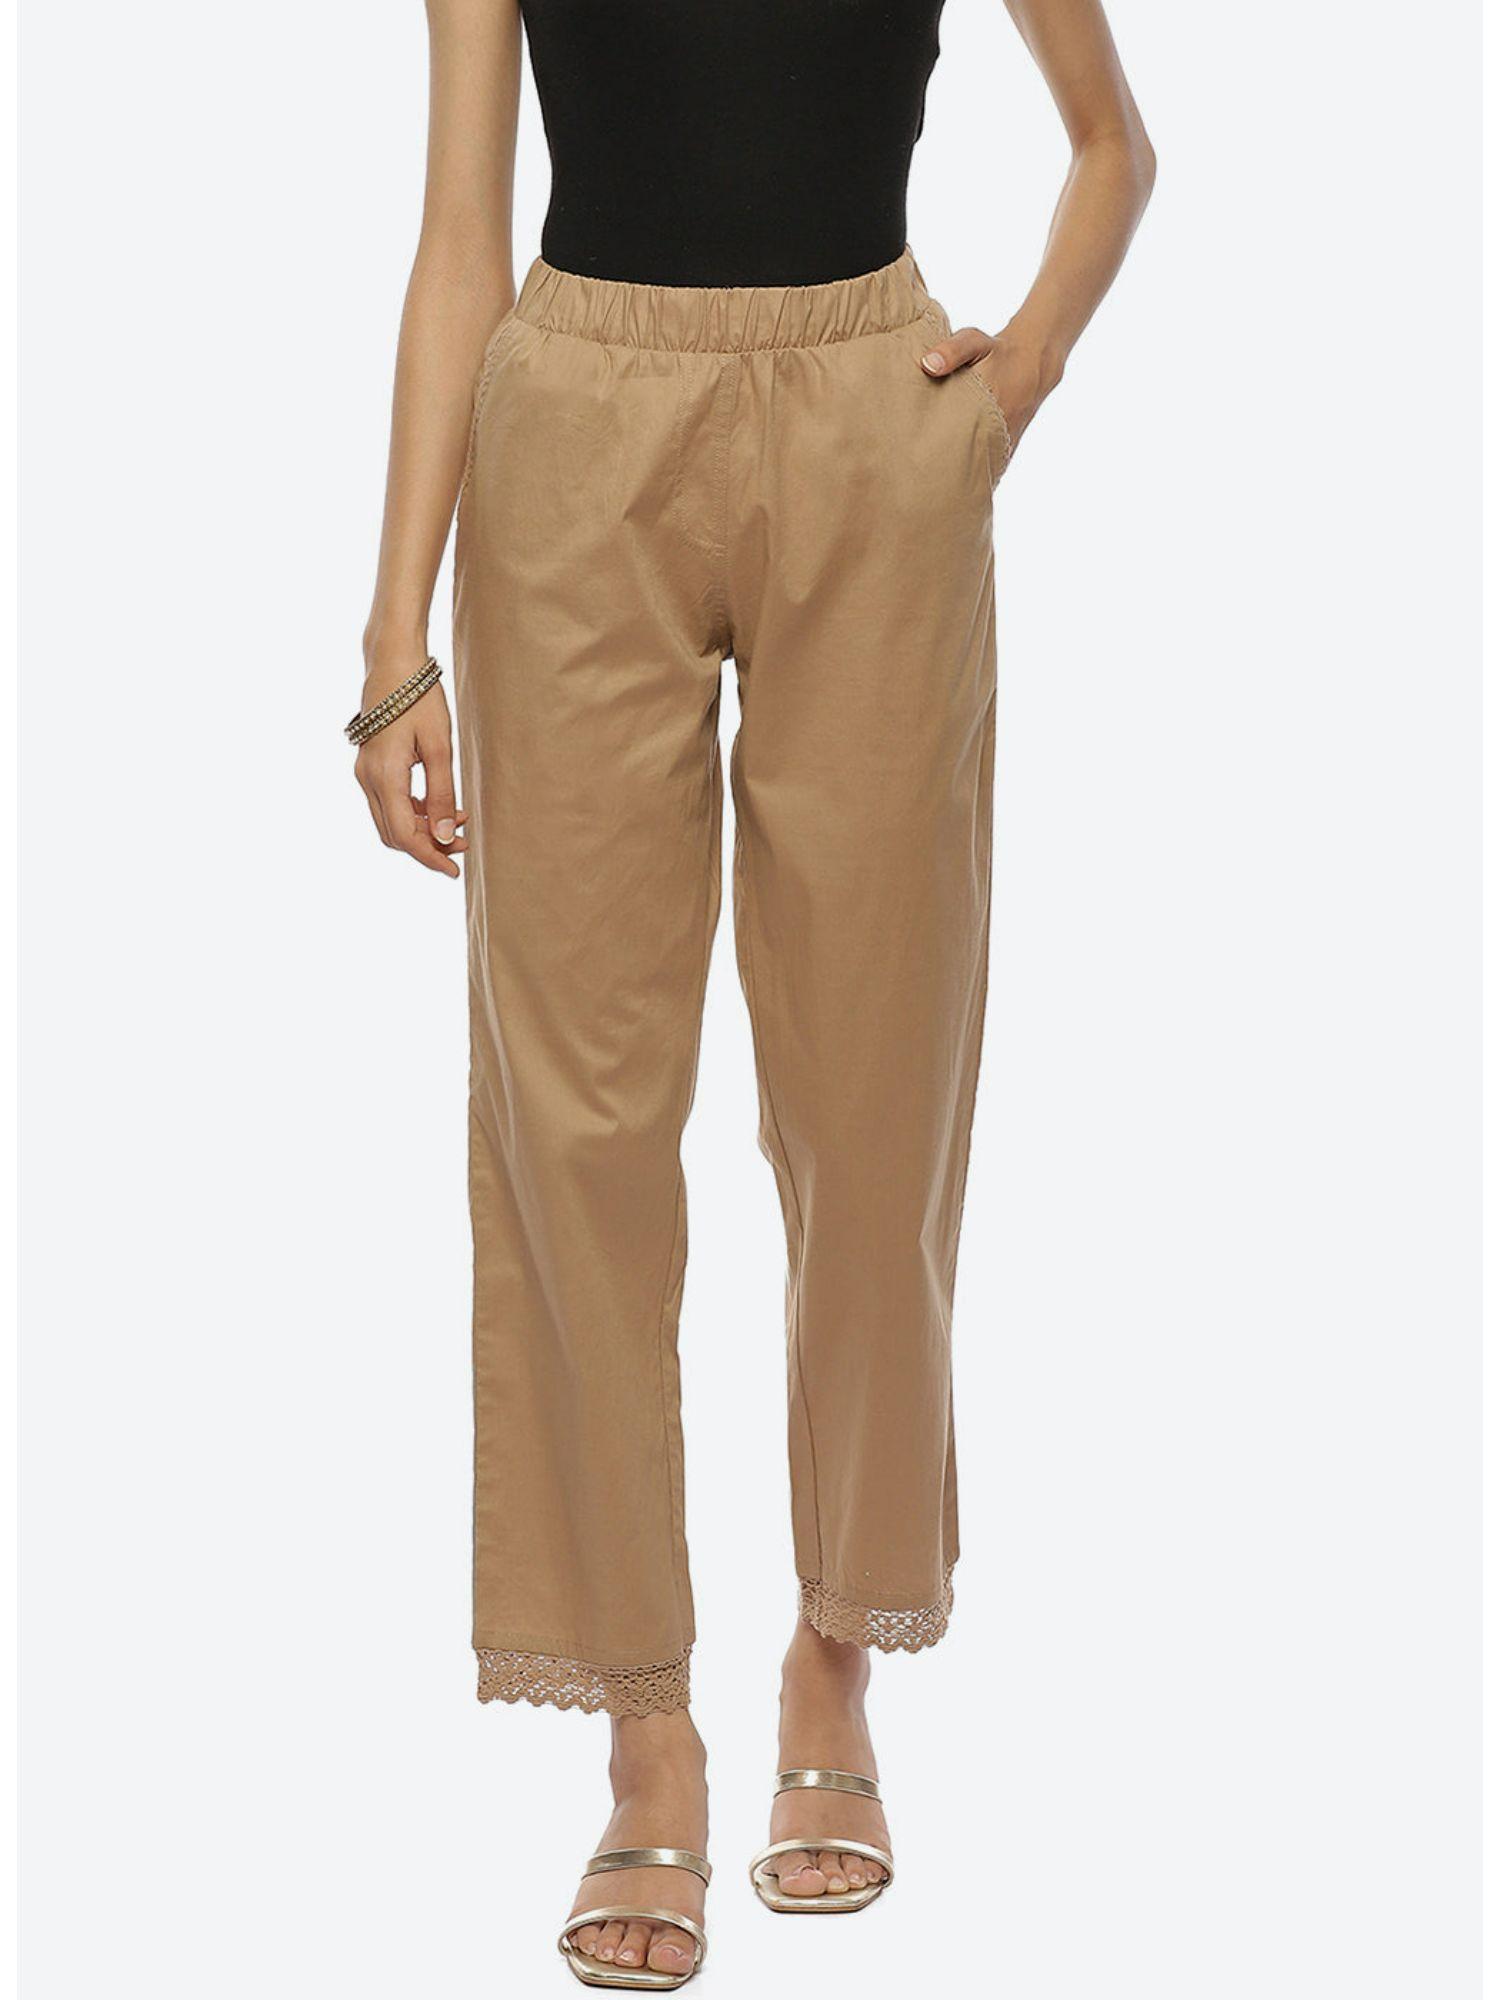 beige pants with lace detail